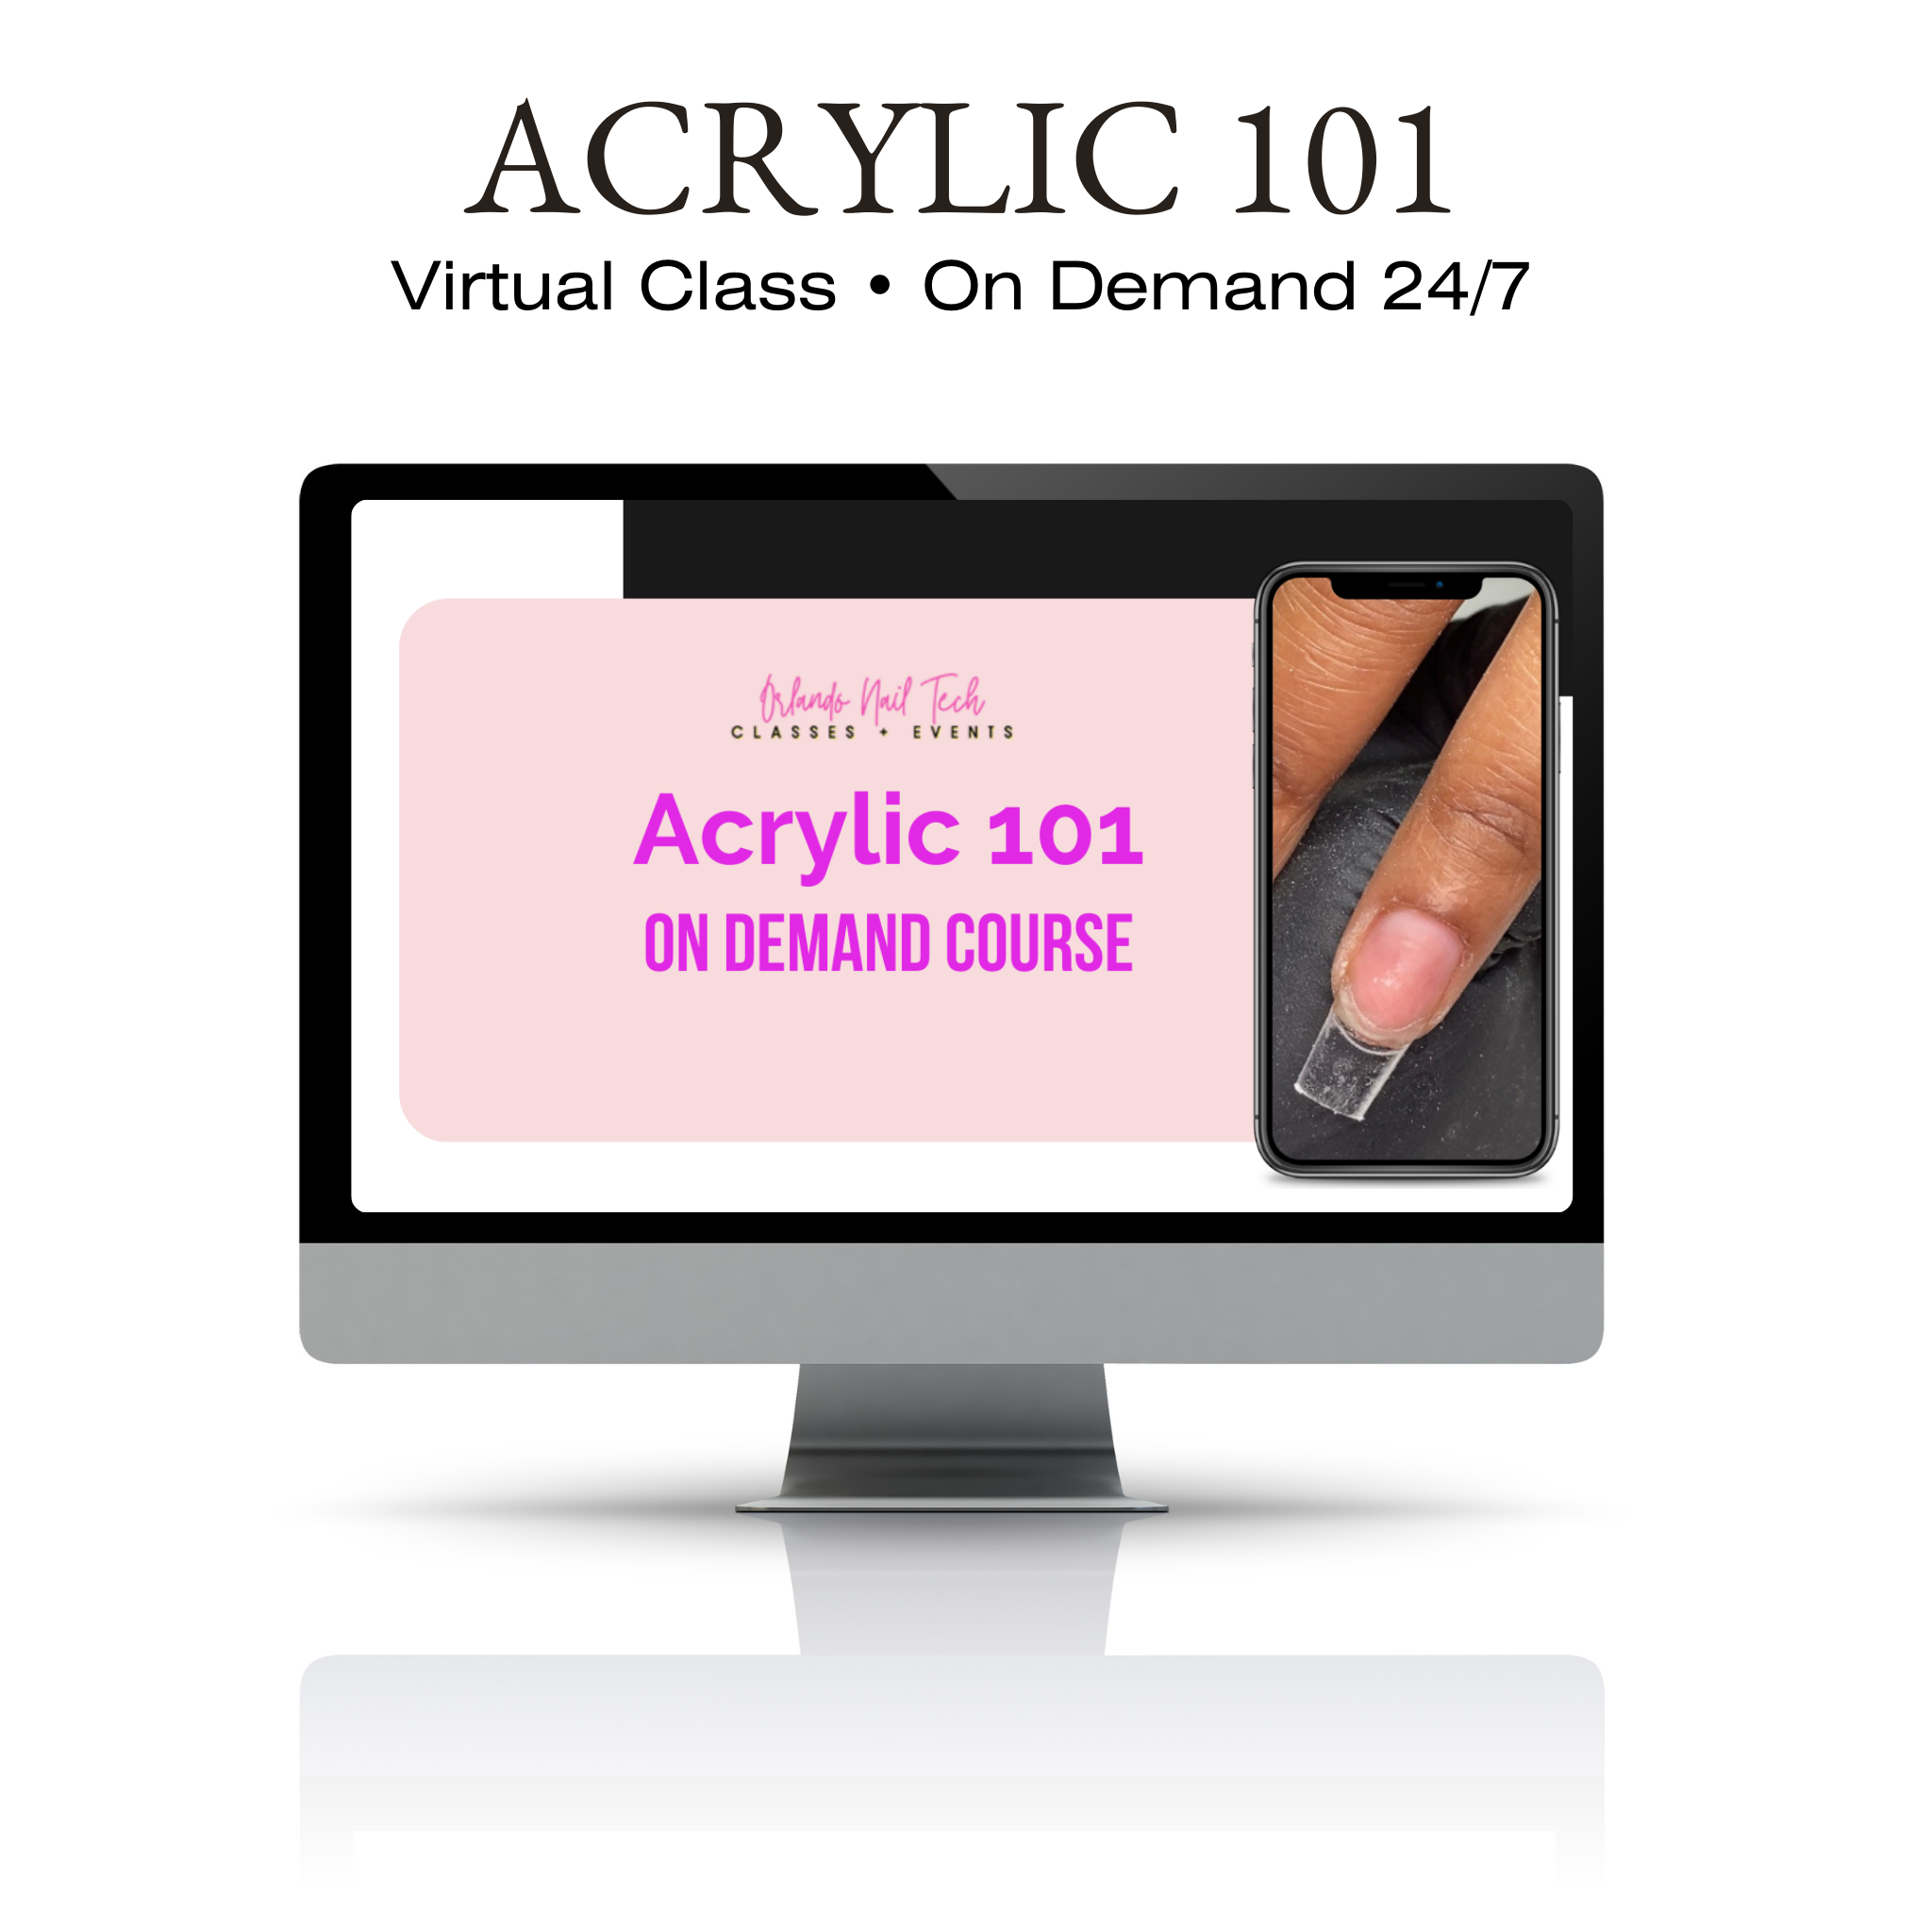 Nail Courses Online – The Best Nail Technology Course you can do at home